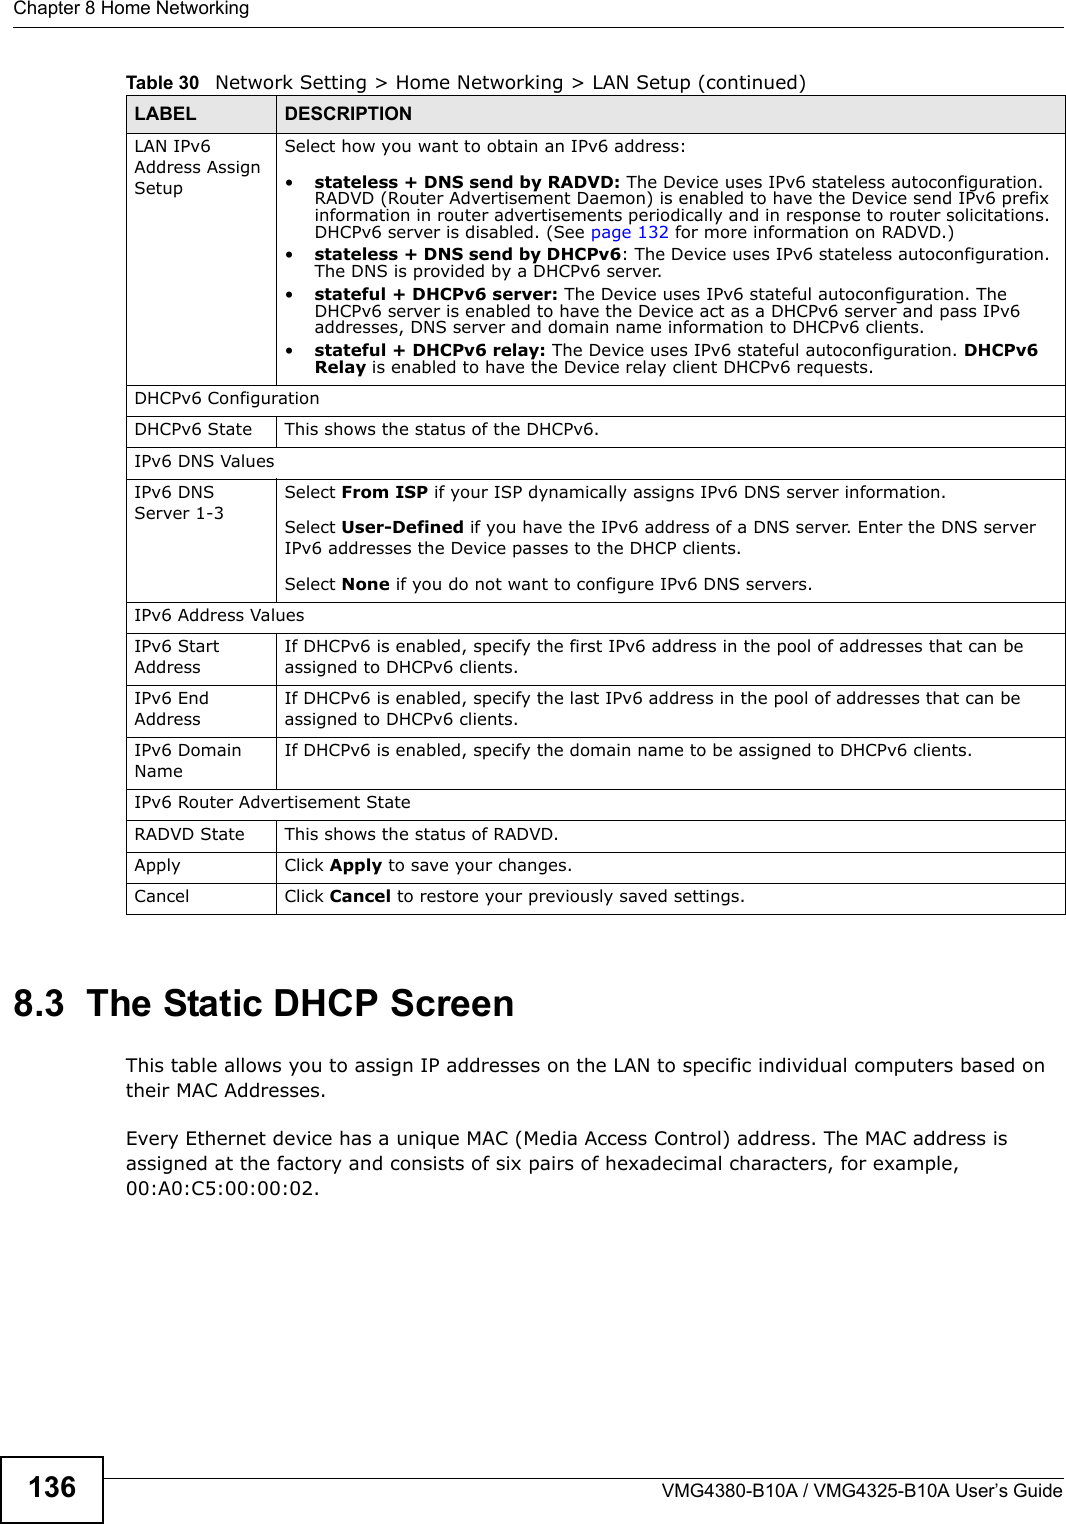 Chapter 8 Home NetworkingVMG4380-B10A / VMG4325-B10A User’s Guide1368.3  The Static DHCP ScreenThis table allows you to assign IP addresses on the LAN to specific individual computers based ontheir MAC Addresses. Every Ethernet device has a unique MAC (Media Access Control) address. The MAC address is assigned at the factory and consists of six pairs of hexadecimal characters, for example, 00:A0:C5:00:00:02.LAN IPv6Address AssignSetupSelect how you want to obtain an IPv6 address:•stateless + DNS send by RADVD: The Device uses IPv6 stateless autoconfiguration. RADVD (Router Advertisement Daemon) is enabled to have the Device send IPv6 prefixinformation in router advertisements periodically and in response to router solicitations.DHCPv6 server is disabled. (See page 132 for more information on RADVD.)•stateless + DNS send by DHCPv6: The Device uses IPv6 stateless autoconfiguration. The DNS is provided by a DHCPv6 server.•stateful + DHCPv6 server: The Device uses IPv6 stateful autoconfiguration. The DHCPv6 server is enabled to have the Device act as a DHCPv6 server and pass IPv6 addresses, DNS server and domain name information to DHCPv6 clients.•stateful + DHCPv6 relay: The Device uses IPv6 stateful autoconfiguration. DHCPv6Relay is enabled to have the Device relay client DHCPv6 requests. DHCPv6 ConfigurationDHCPv6 State This shows the status of the DHCPv6.IPv6 DNS ValuesIPv6 DNSServer 1-3Select From ISP if your ISP dynamically assigns IPv6 DNS server information.Select User-Defined if you have the IPv6 address of a DNS server. Enter the DNS server IPv6 addresses the Device passes to the DHCP clients.Select None if you do not want to configure IPv6 DNS servers.IPv6 Address ValuesIPv6 Start AddressIf DHCPv6 is enabled, specify the first IPv6 address in the pool of addresses that can be assigned to DHCPv6 clients.IPv6 EndAddressIf DHCPv6 is enabled, specify the last IPv6 address in the pool of addresses that can beassigned to DHCPv6 clients.IPv6 DomainNameIf DHCPv6 is enabled, specify the domain name to be assigned to DHCPv6 clients.IPv6 Router Advertisement StateRADVD State  This shows the status of RADVD.Apply Click Apply to save your changes.Cancel Click Cancel to restore your previously saved settings.Table 30   Network Setting &gt; Home Networking &gt; LAN Setup (continued)LABEL DESCRIPTION